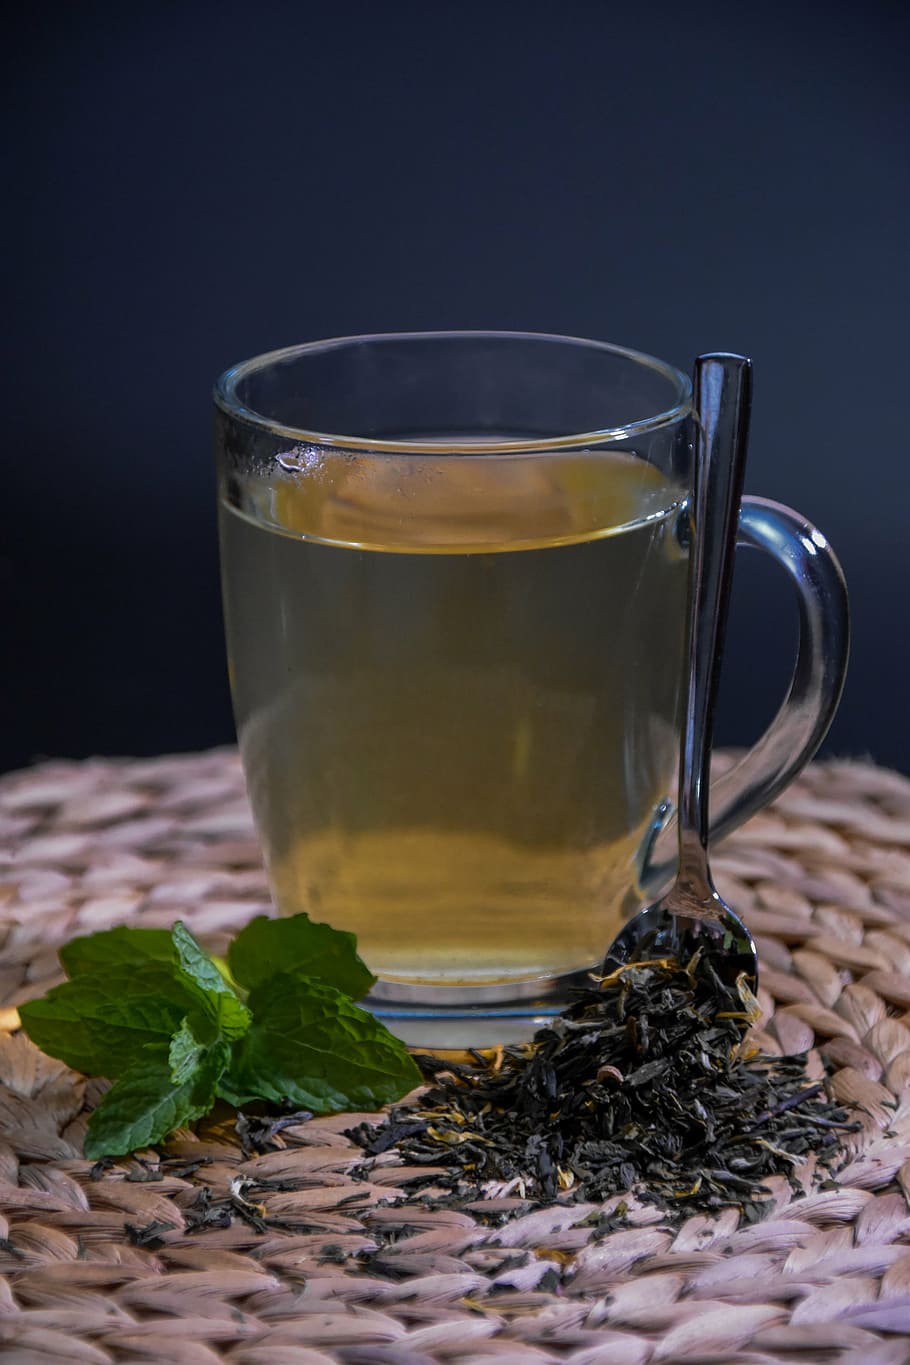 tea, mint, herbs, cup, aromatic, plant, foliage, dry leaves, loose tea, yellow